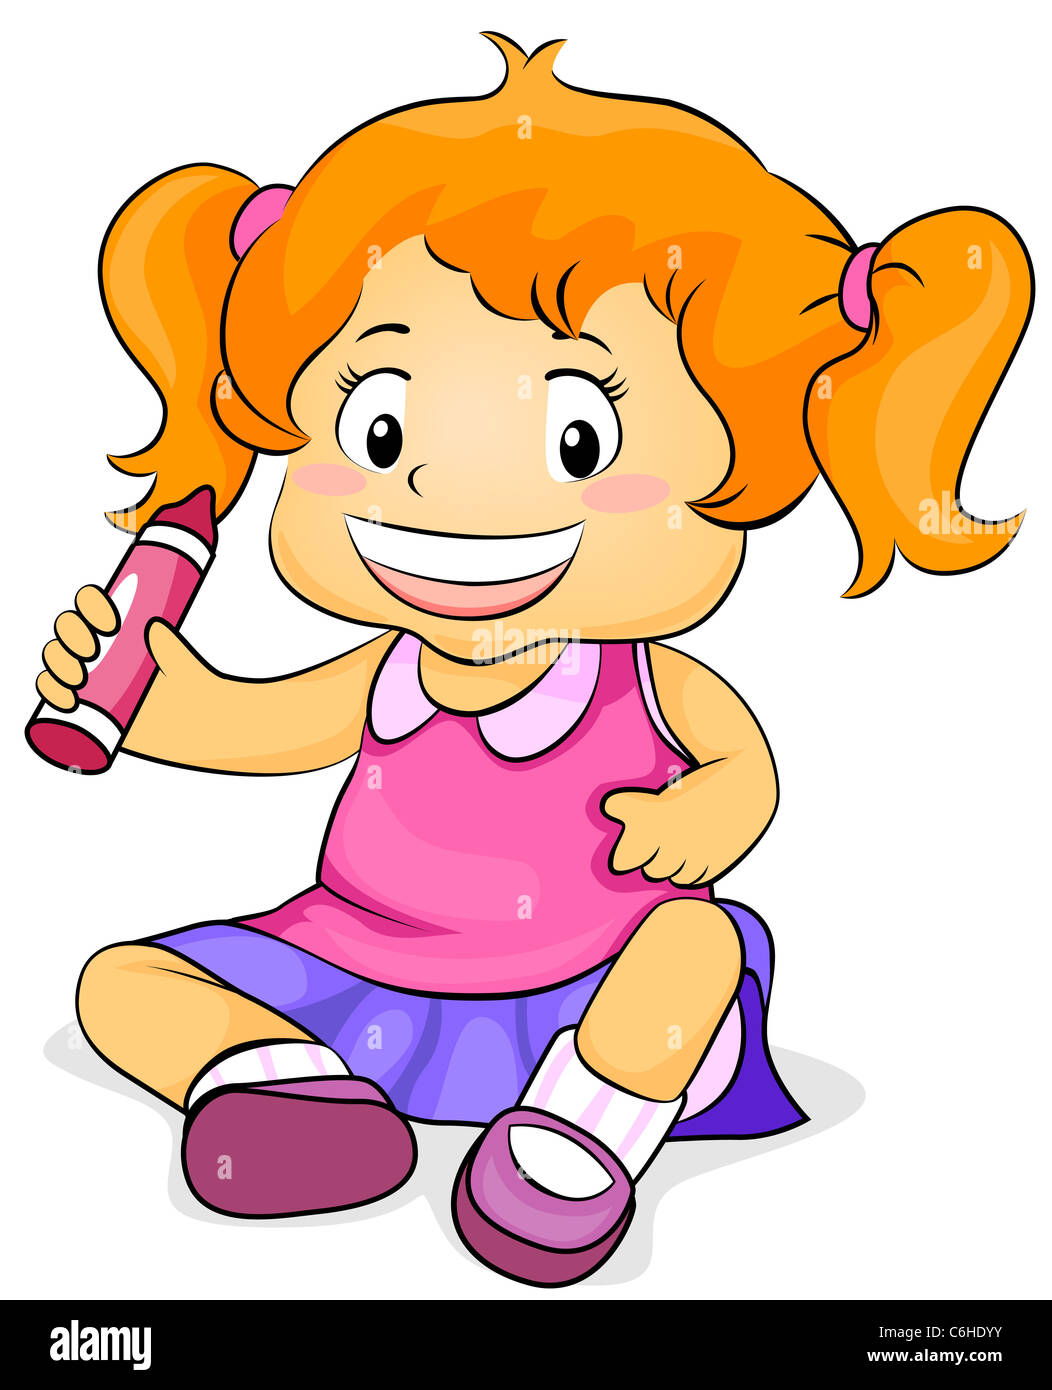 Illustration Featuring a Girl Holding a Crayon Stock Photo